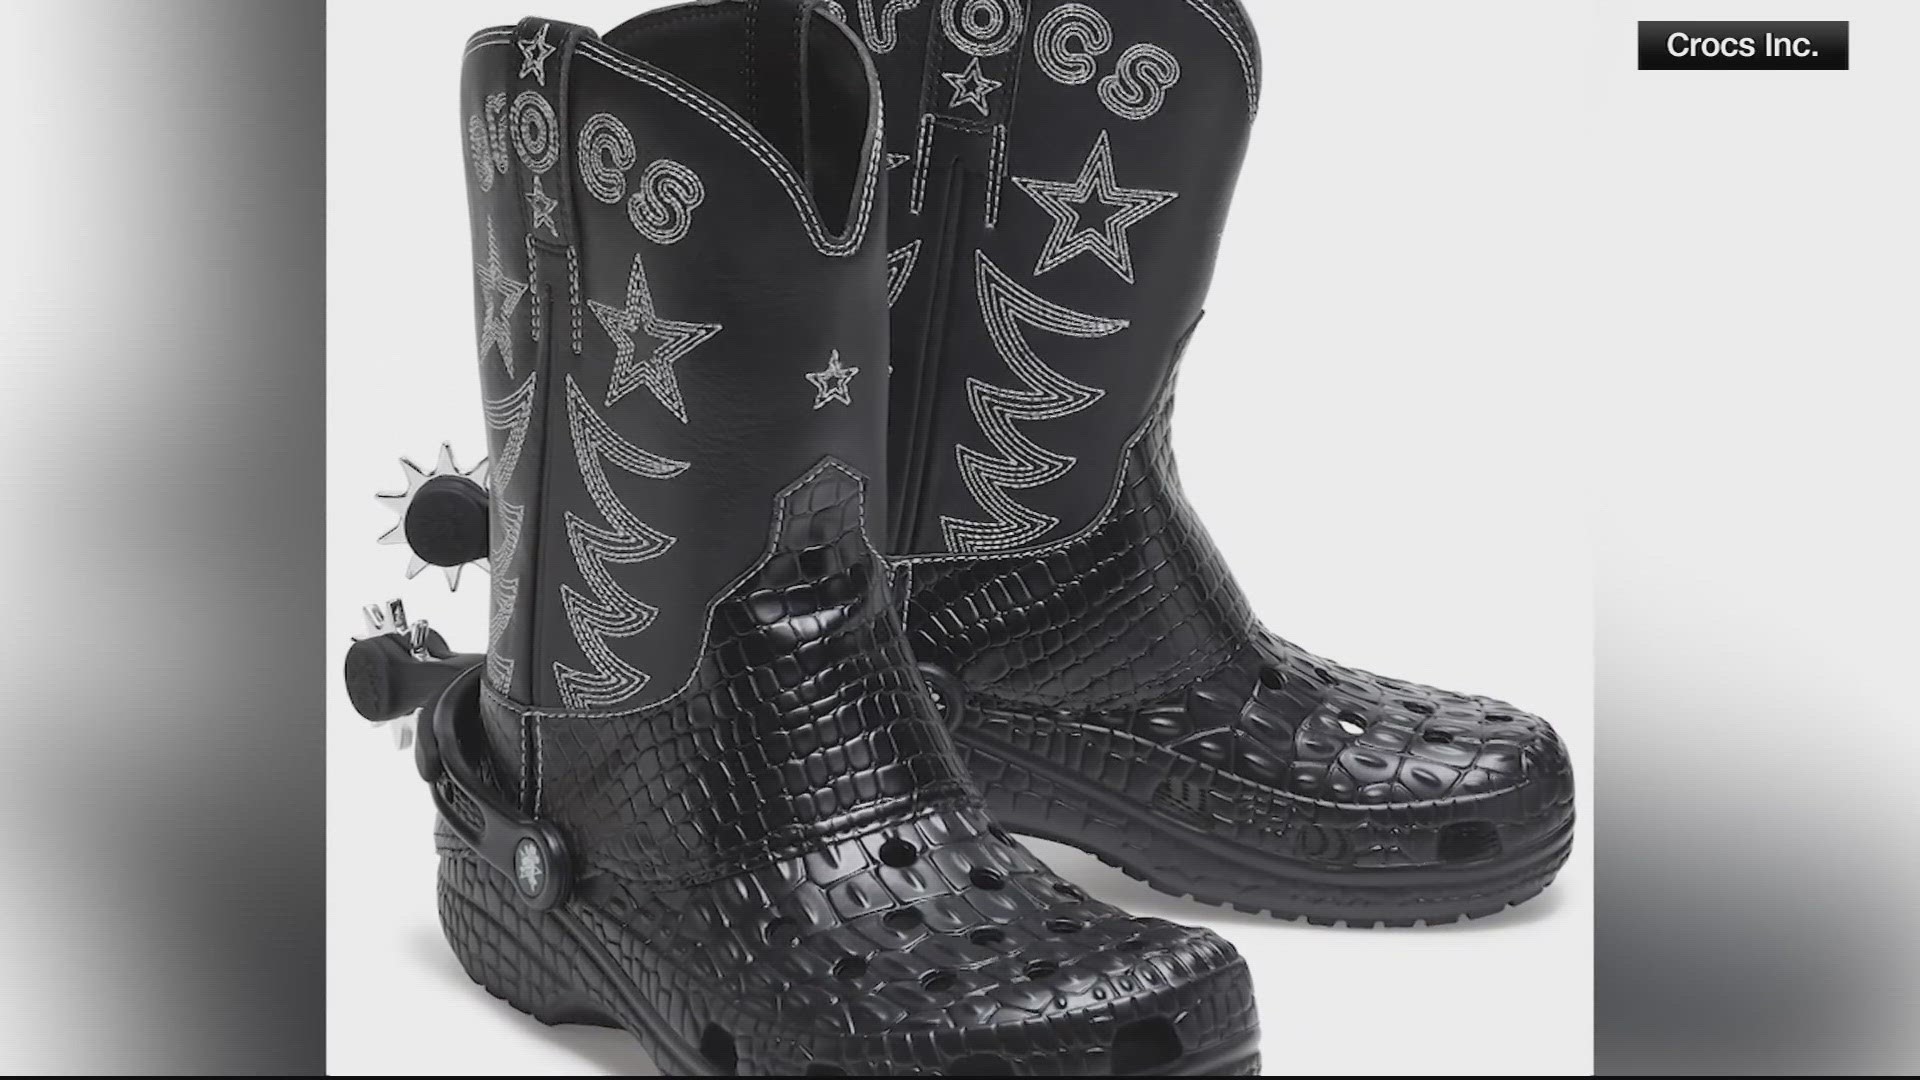 Crocs Cowboy boots: How and when you can buy a pair | firstcoastnews.com